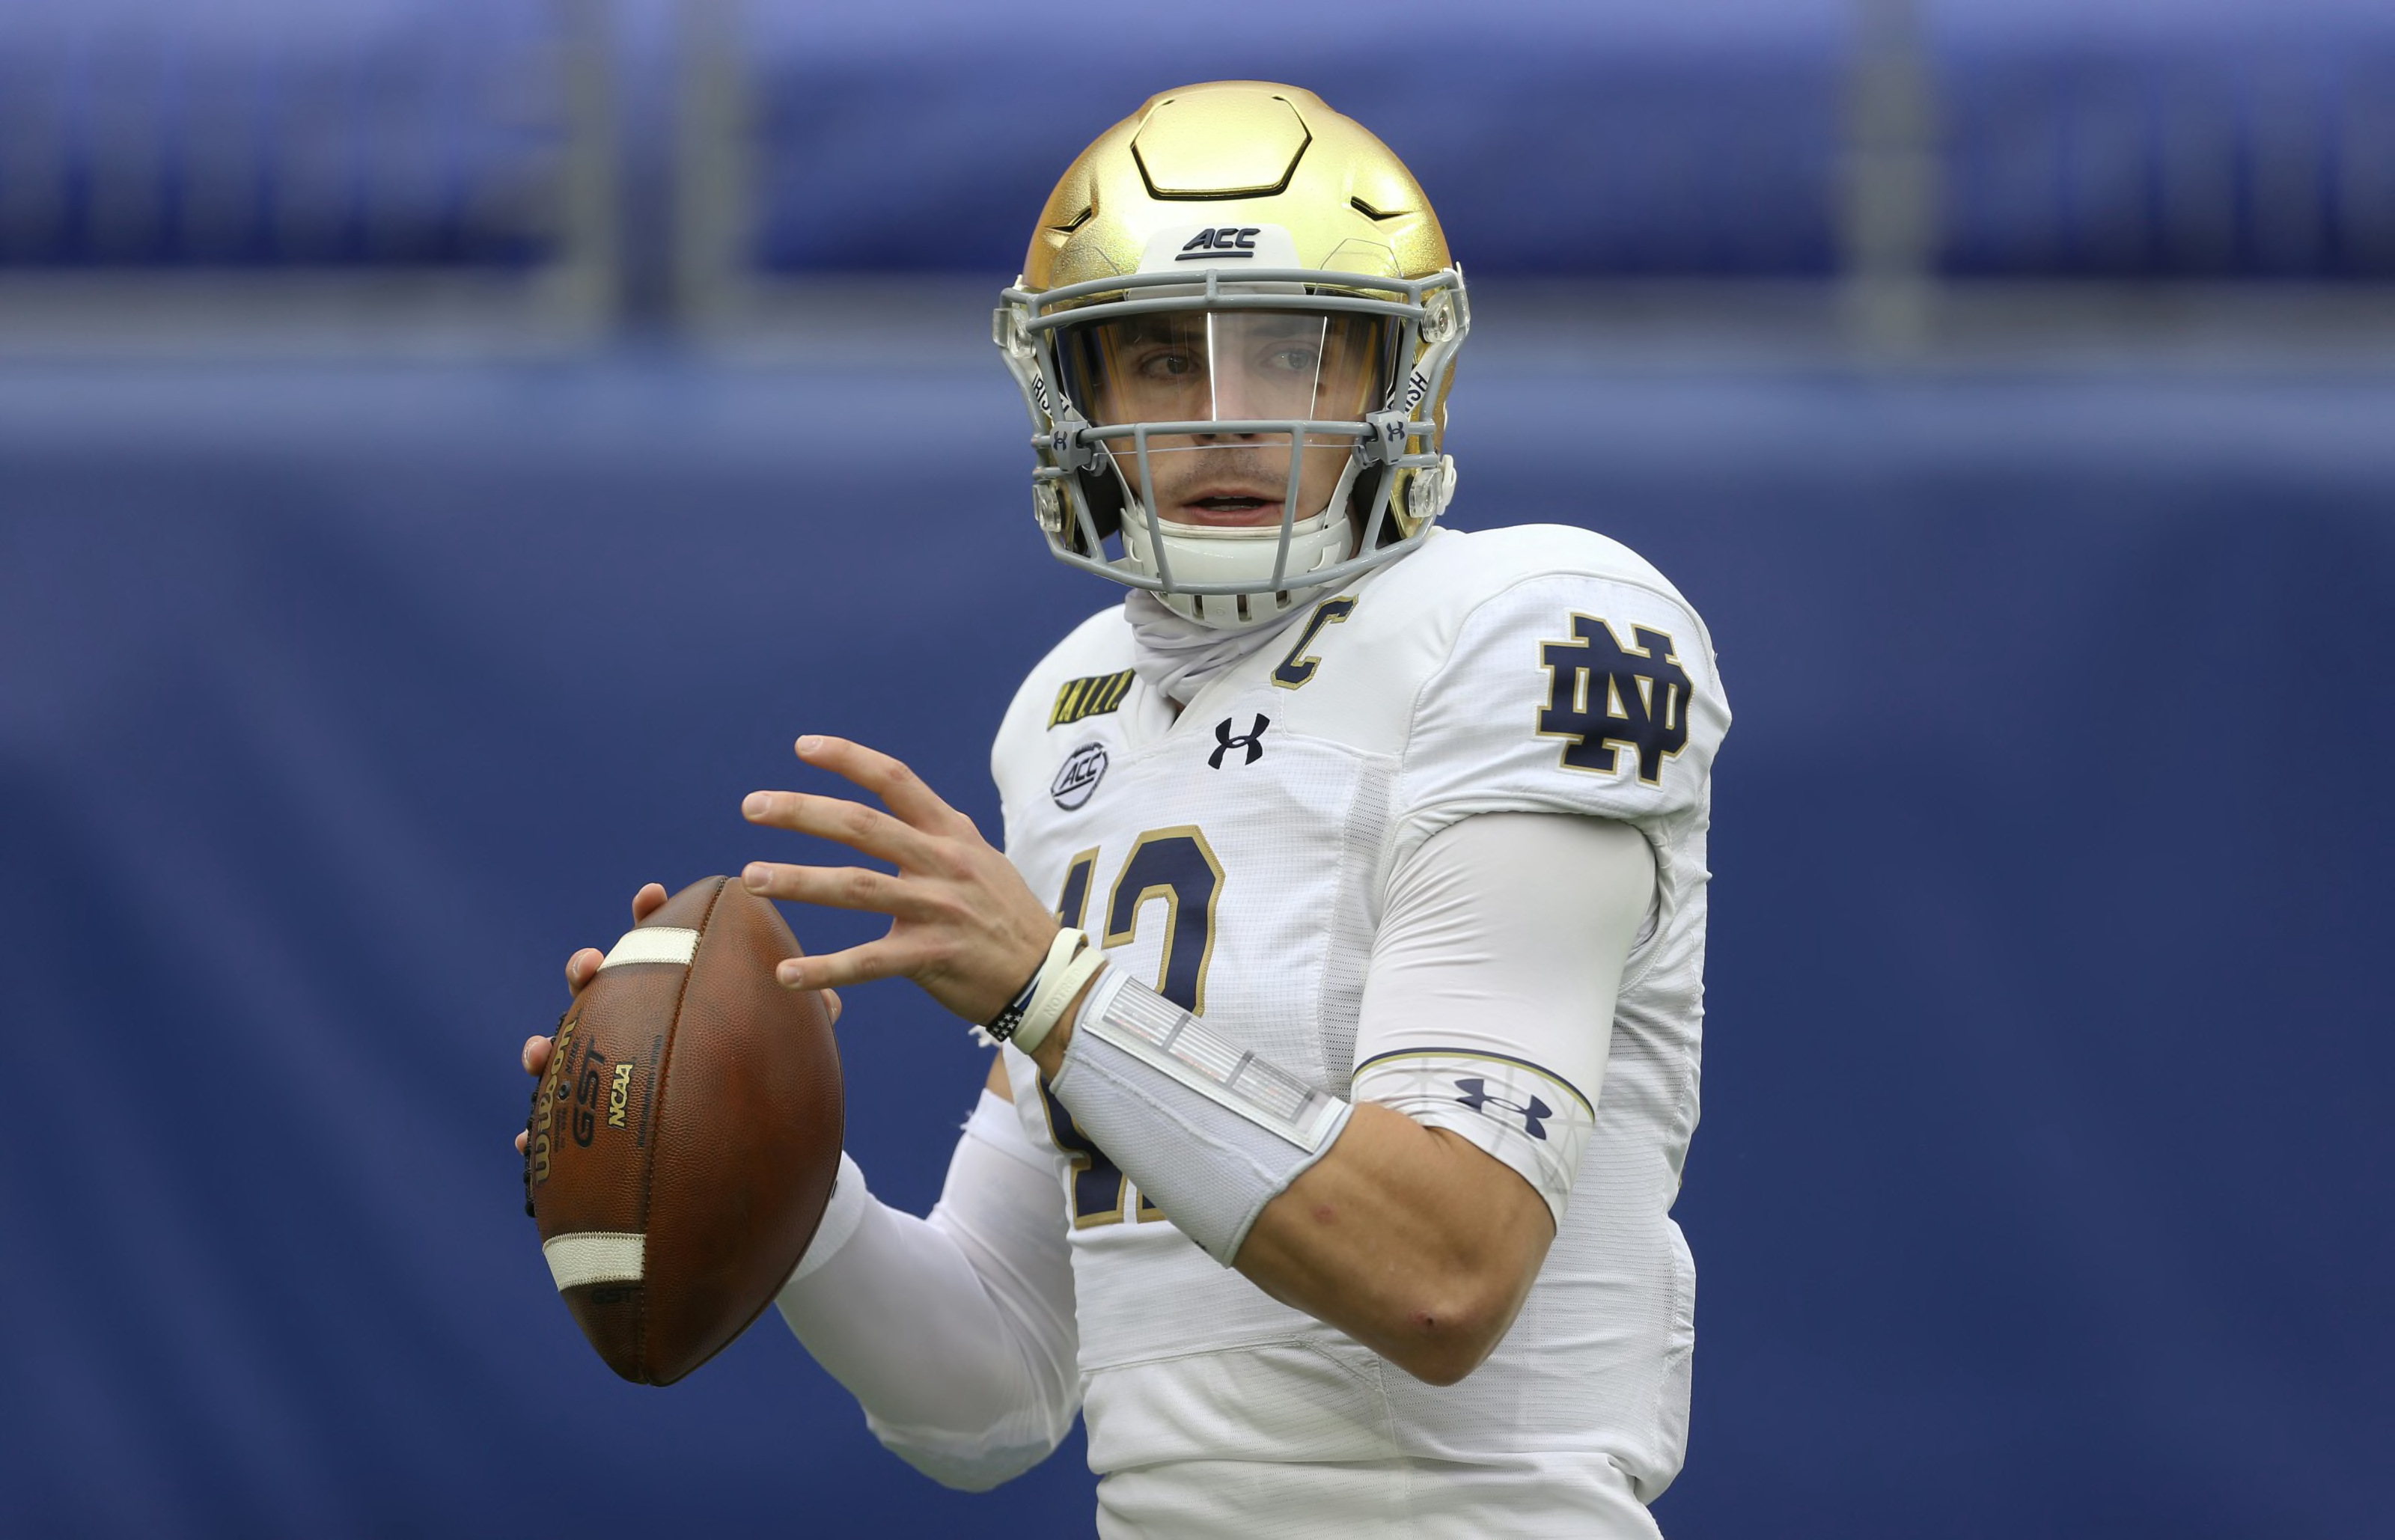 Notre Dame Football: 3 hot takes from blowout win over Pitt - Page 2